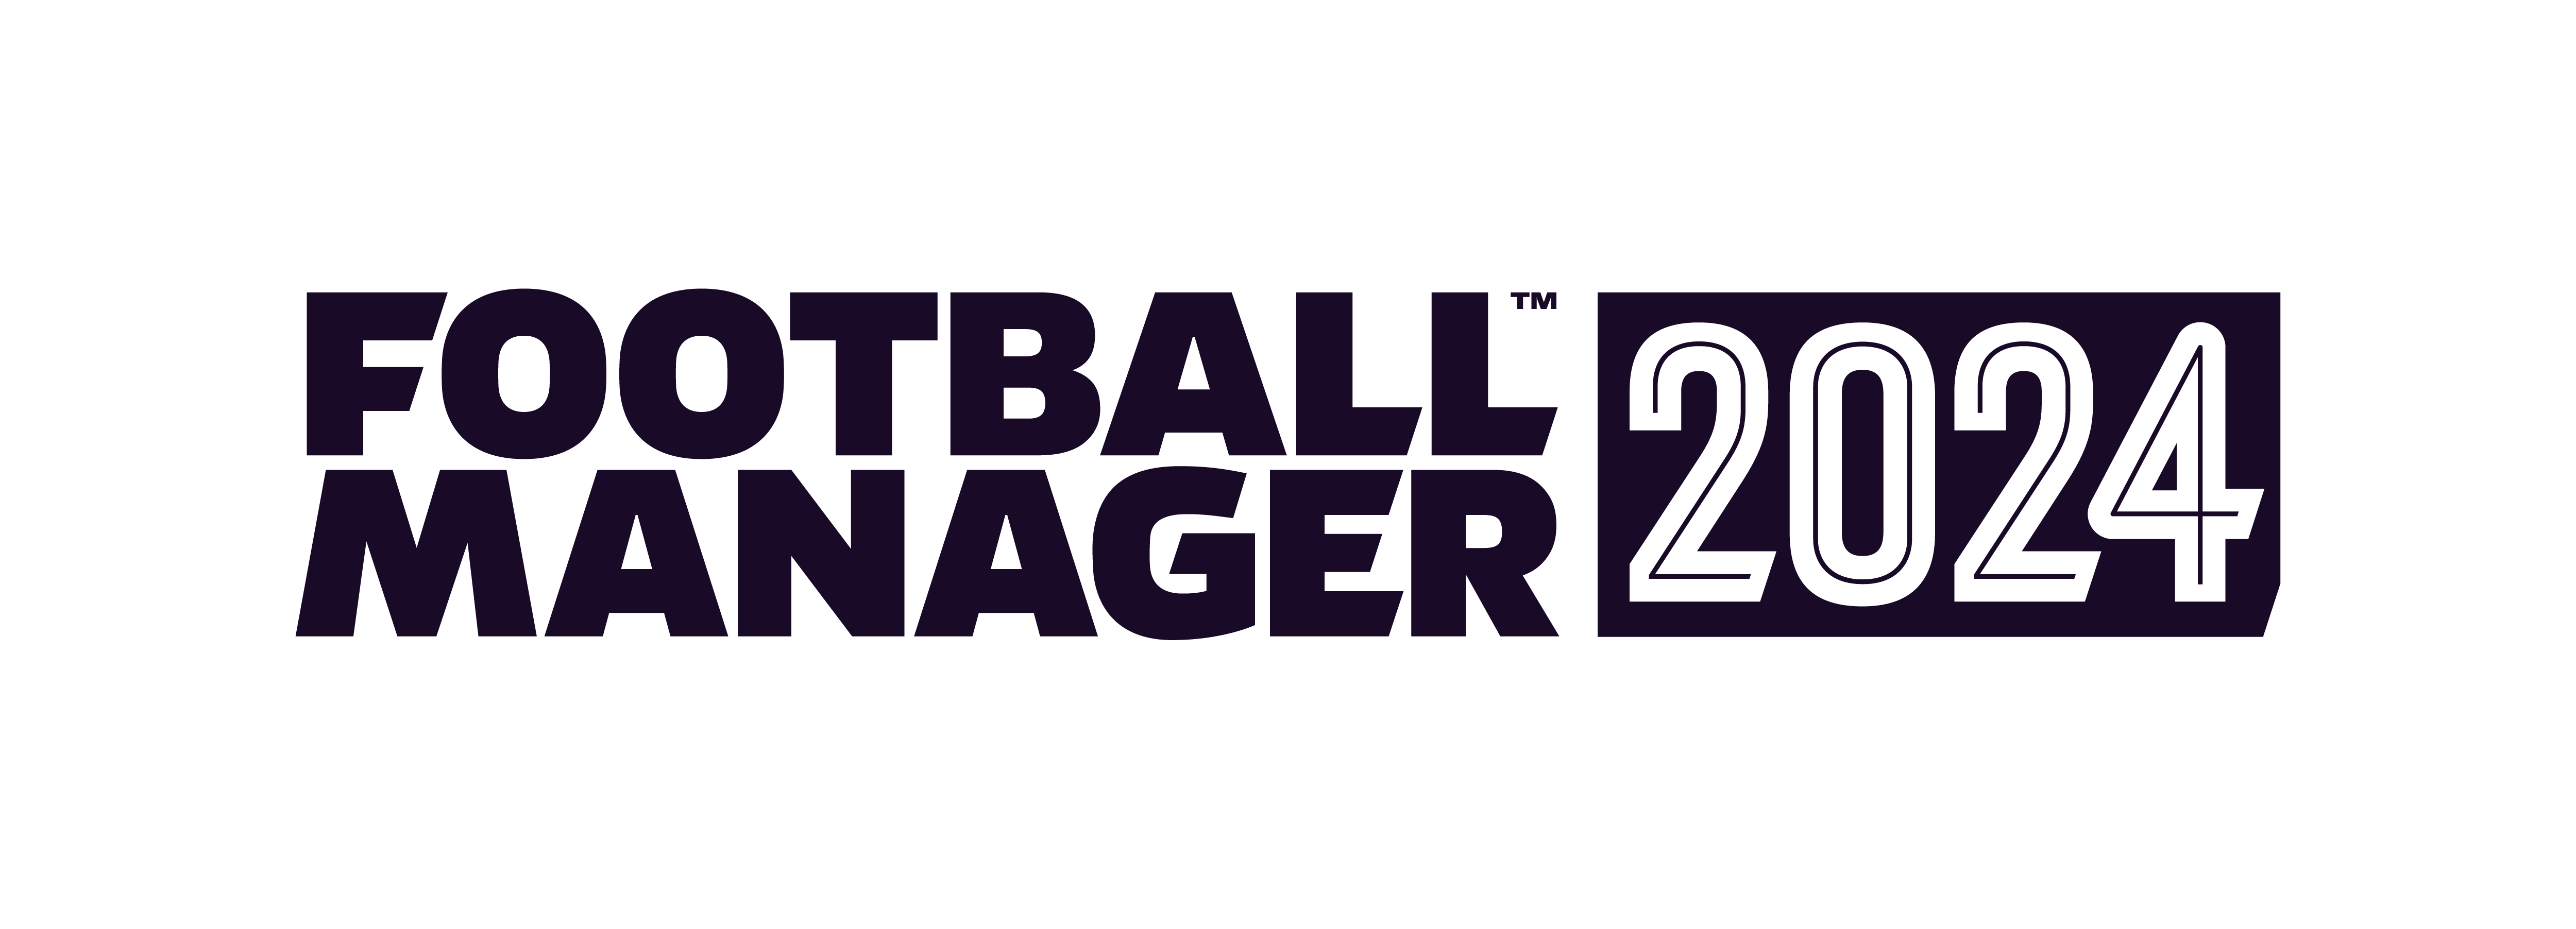 Football Manager 2024 sees long-awaited J.League debut 👾 COSMOCOVER - The  best PR agency for video games in Europe!